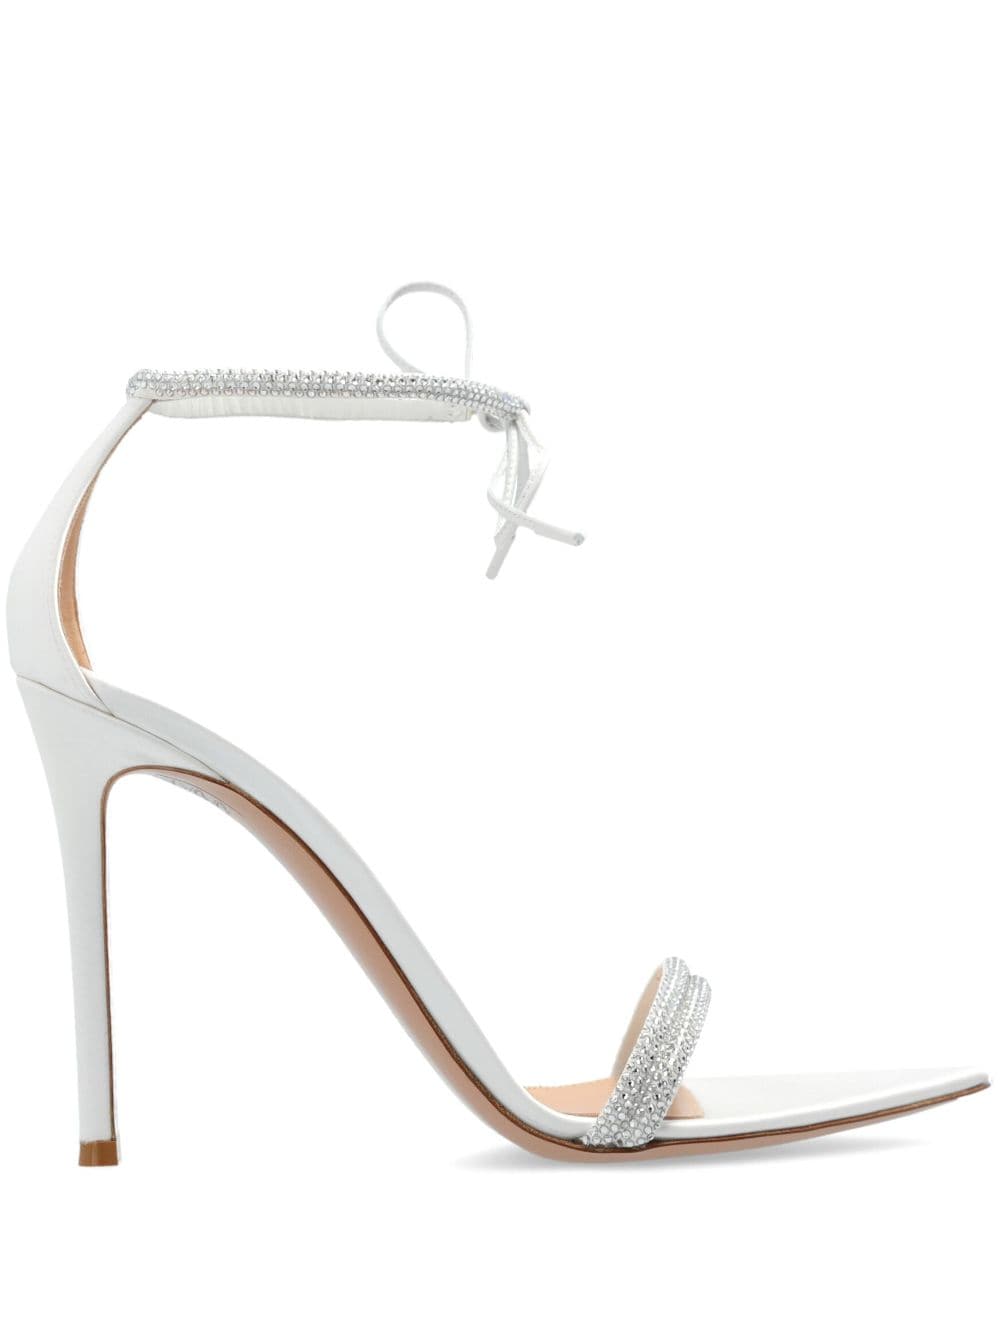 Gianvito Rossi Crystal Embellished 115mm Sandals In White